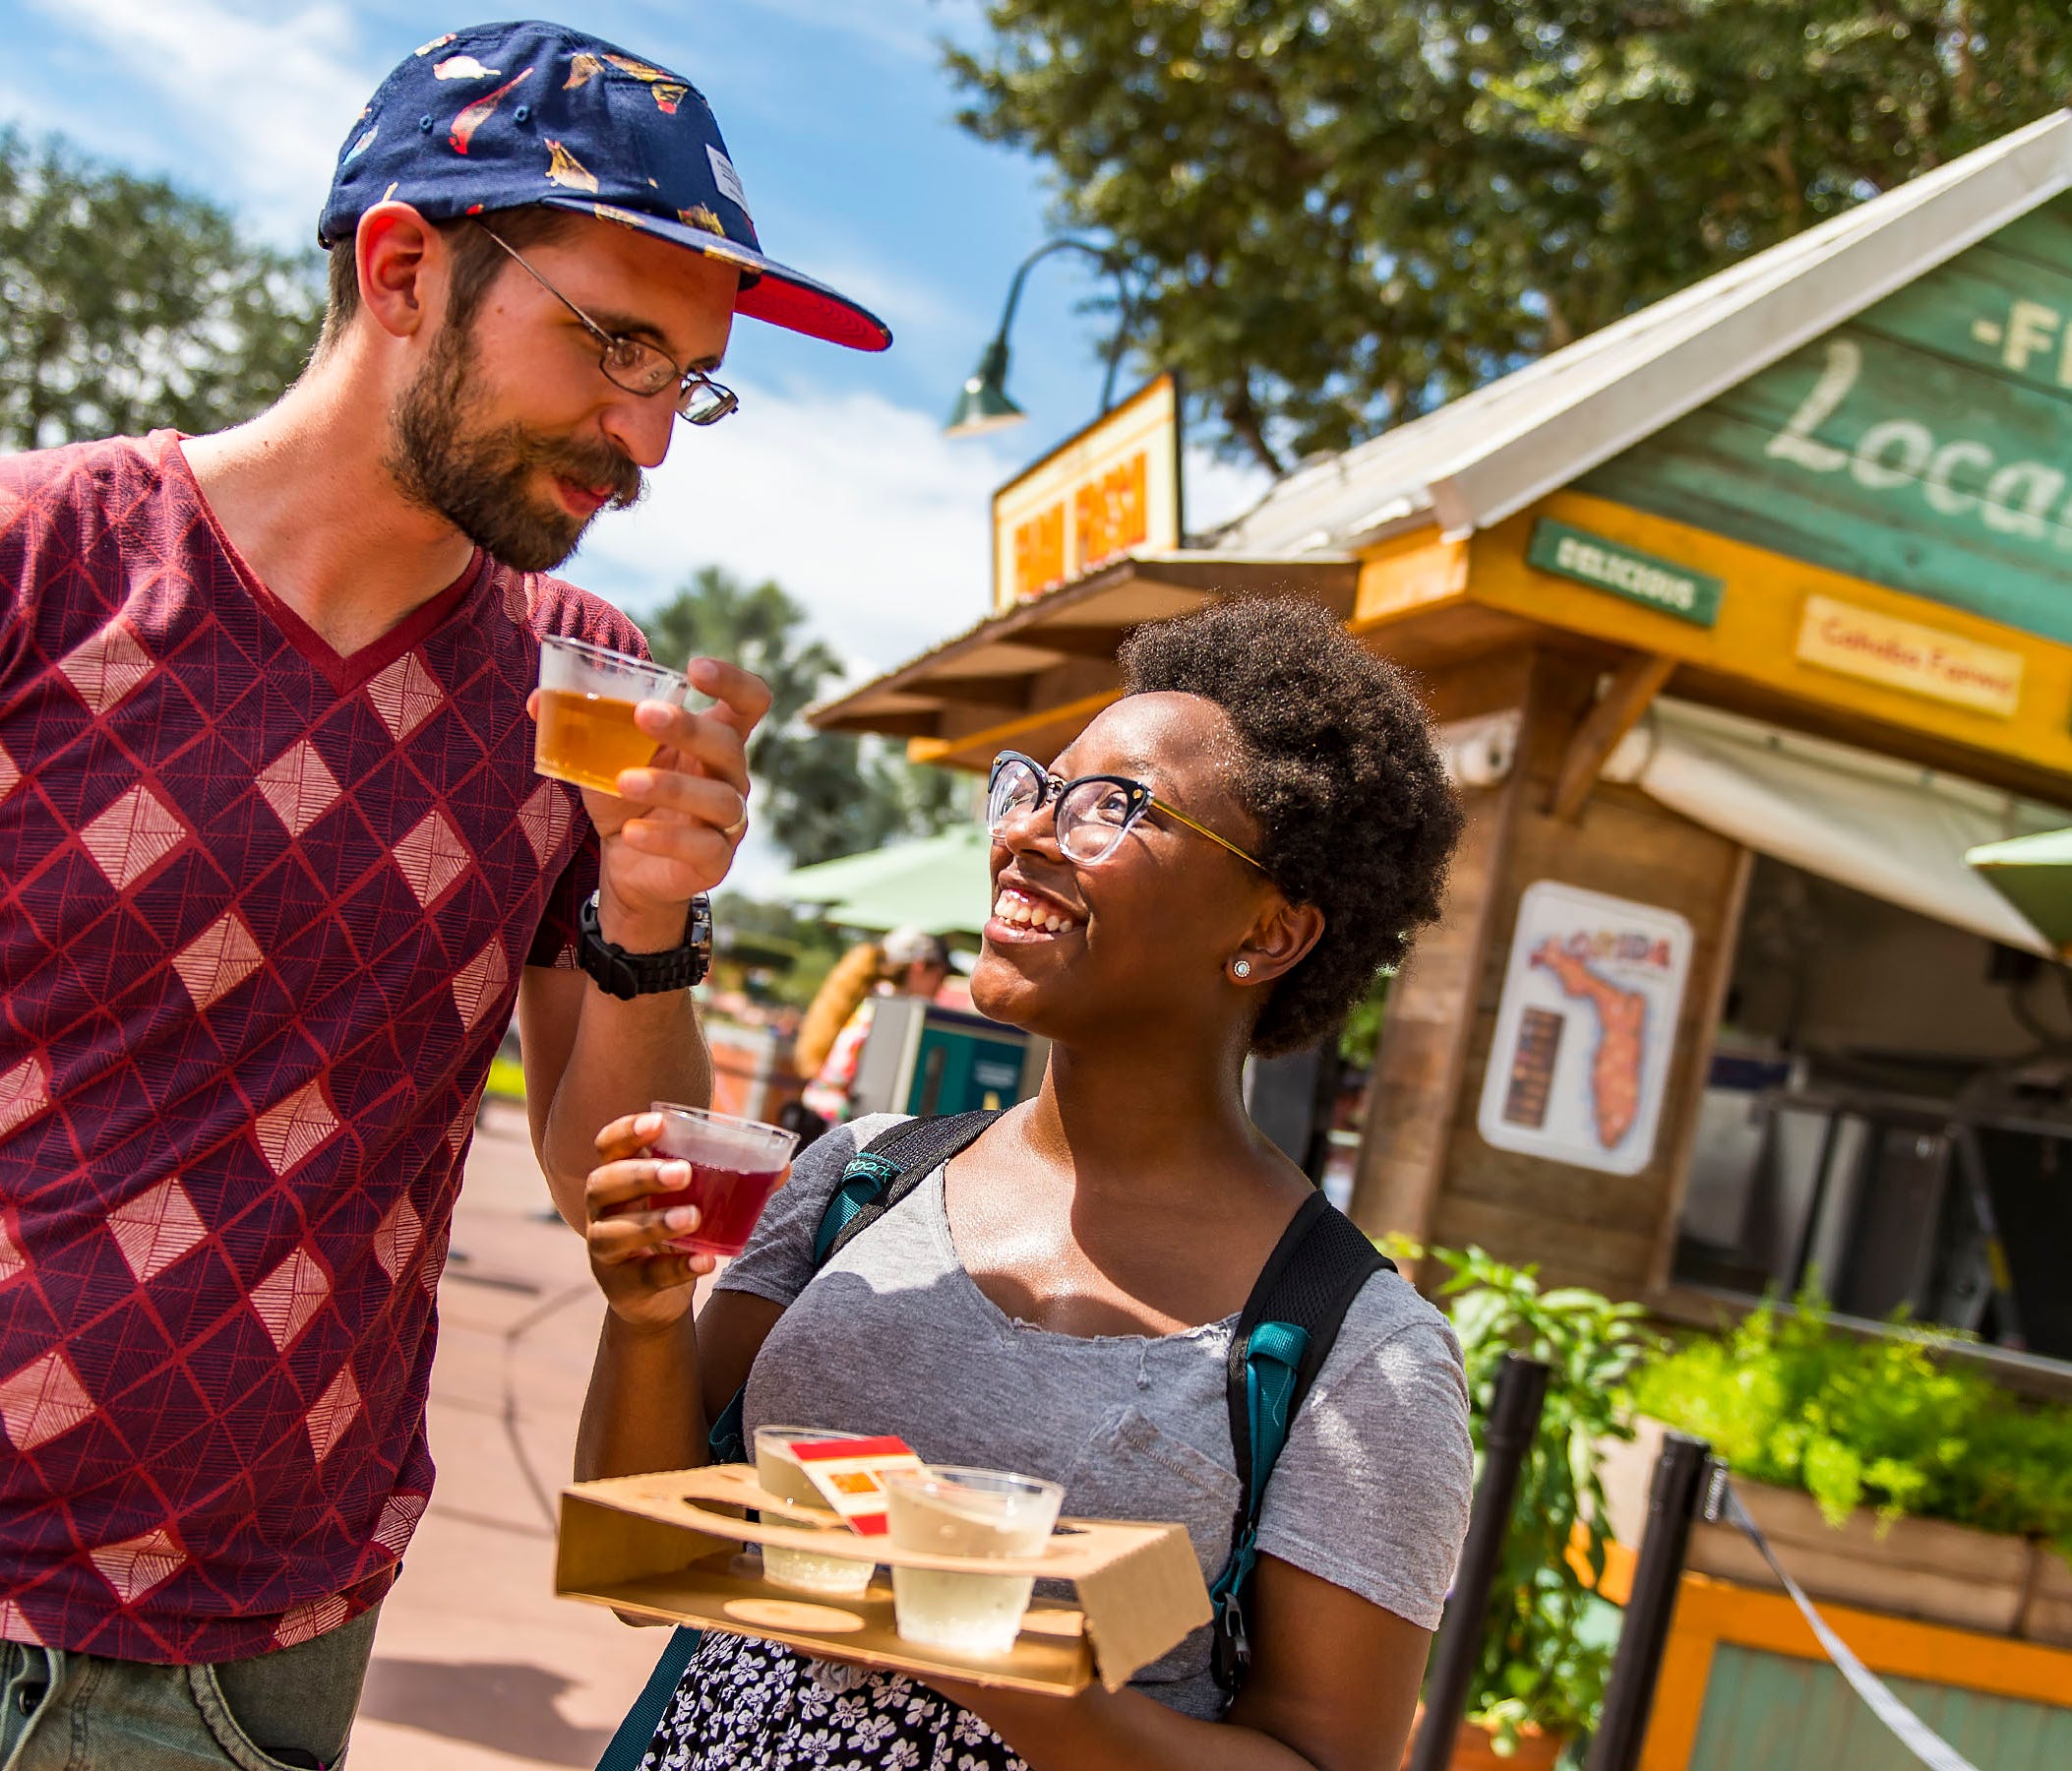 Guests can sample tapas-sized tastes of inventive cuisine at the Farm Fresh Marketplace during the Epcot International Food & Wine Festival at Walt Disney World Resort in Lake Buena Vista, Fla. The popular fall festival also features wine tastings, c